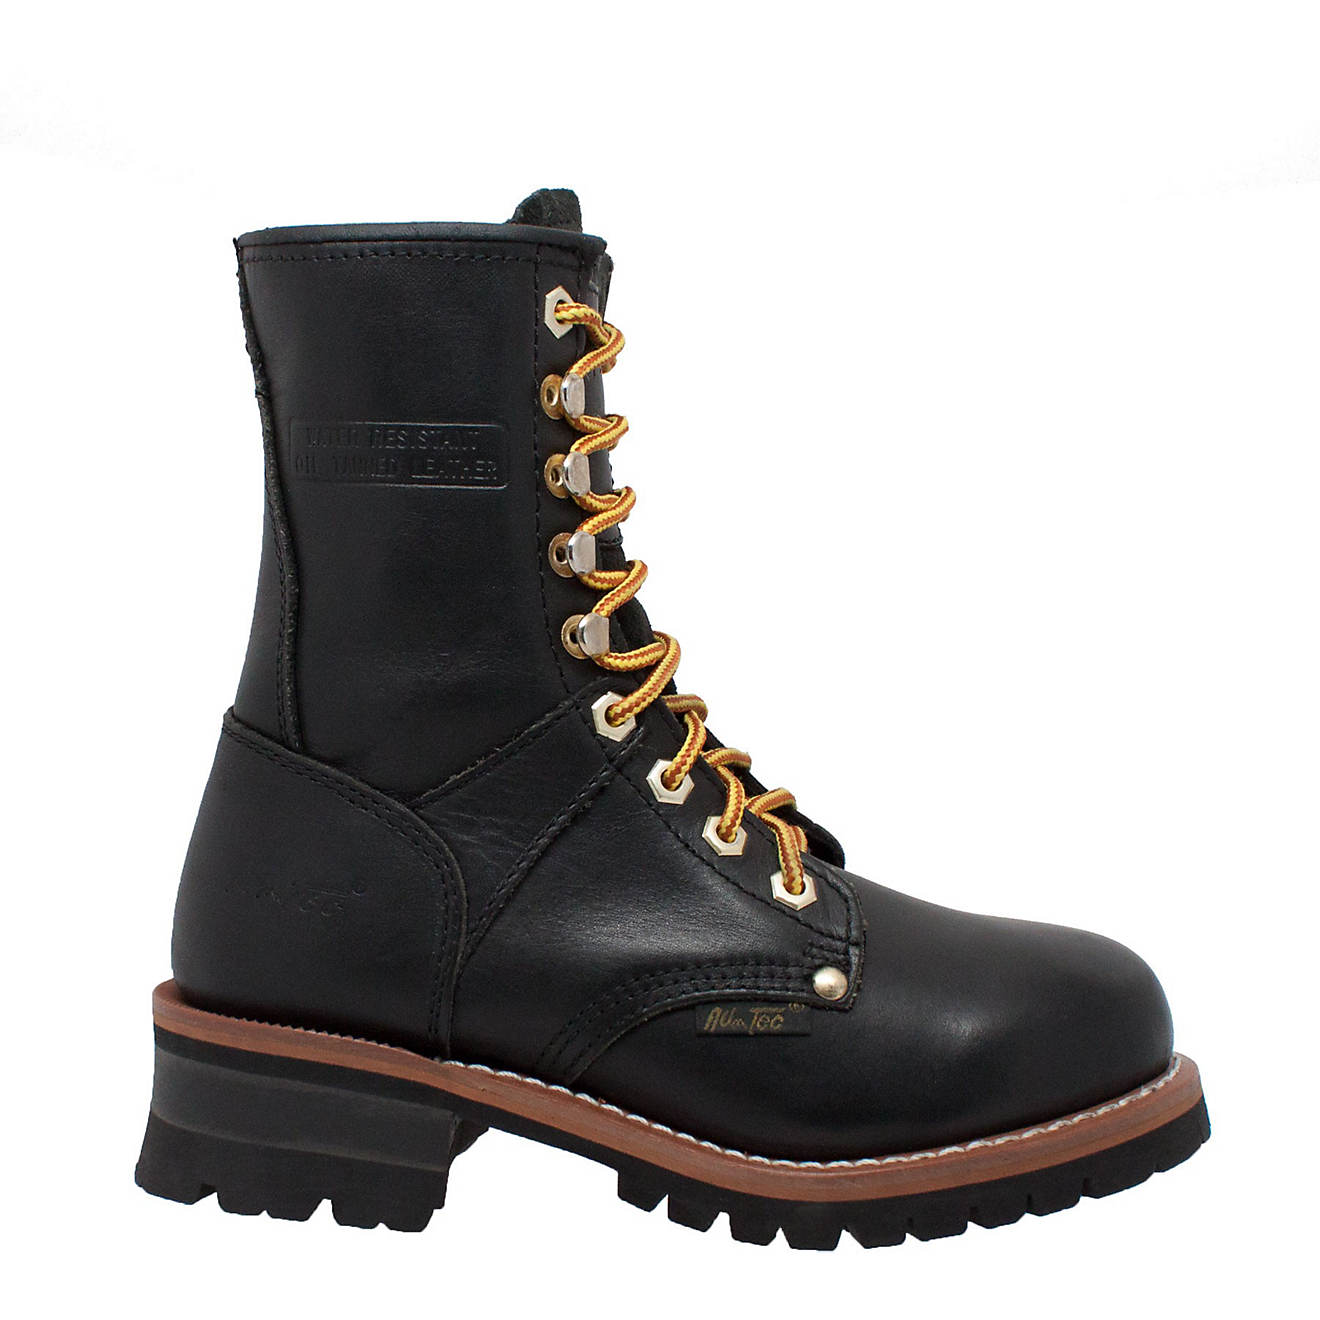 AdTec Women’s Oiled Logger Work Boots | Academy